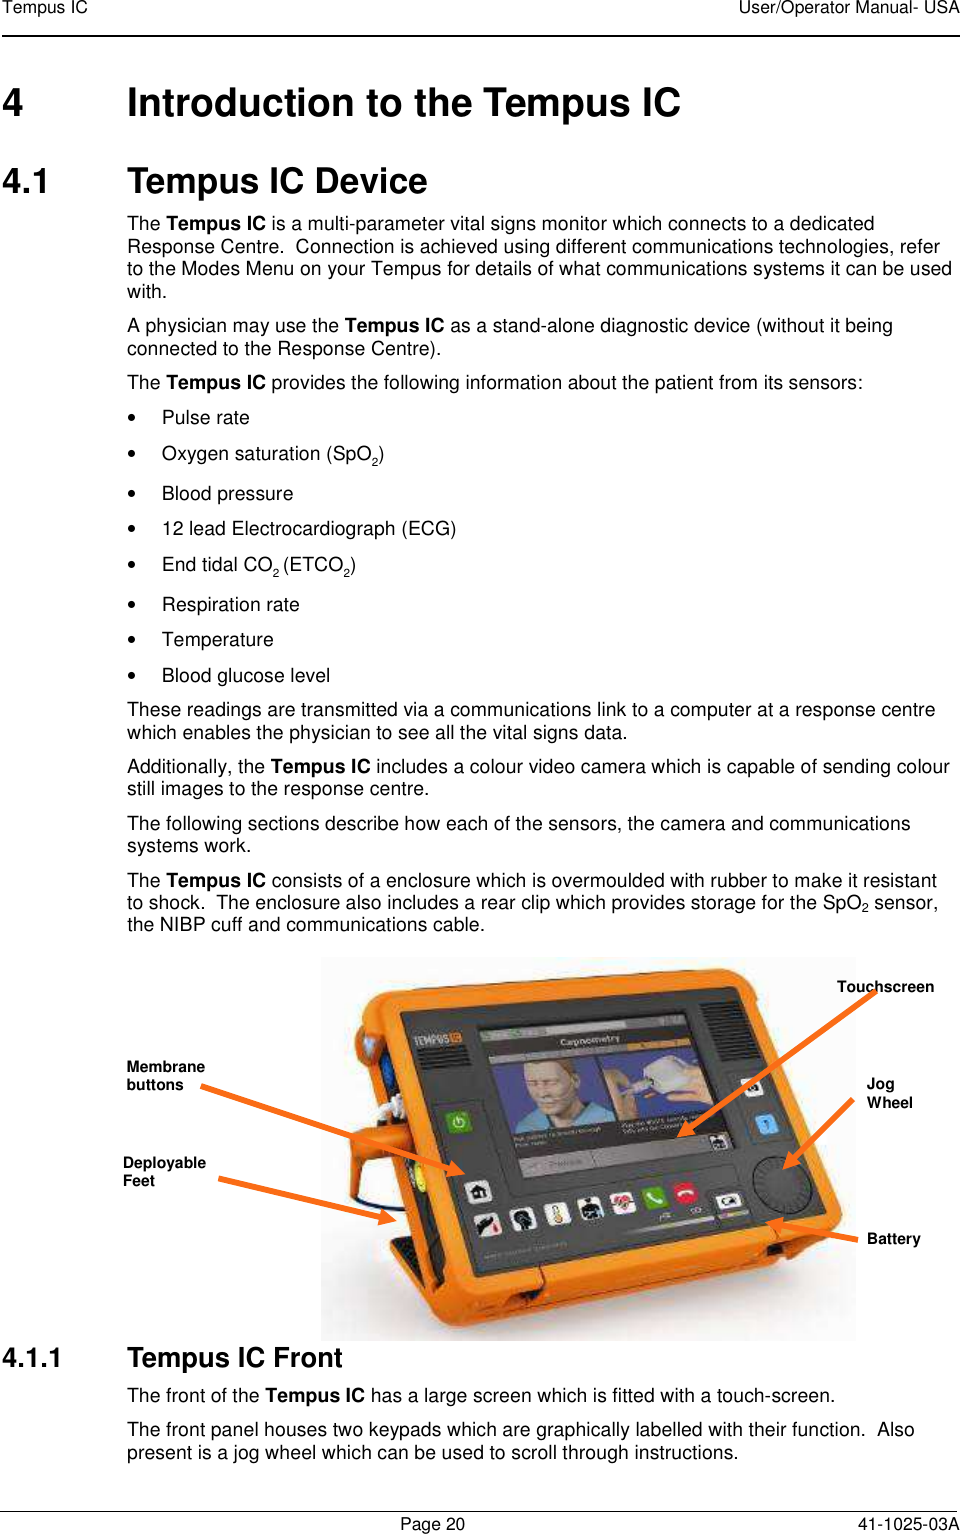 Tempus IC    User/Operator Manual- USA        Page 20  41-1025-03A 4  Introduction to the Tempus IC 4.1  Tempus IC Device The Tempus IC is a multi-parameter vital signs monitor which connects to a dedicated Response Centre.  Connection is achieved using different communications technologies, refer to the Modes Menu on your Tempus for details of what communications systems it can be used with.  A physician may use the Tempus IC as a stand-alone diagnostic device (without it being connected to the Response Centre).   The Tempus IC provides the following information about the patient from its sensors: •  Pulse rate •  Oxygen saturation (SpO2)  •  Blood pressure •  12 lead Electrocardiograph (ECG) •  End tidal CO2 (ETCO2) •  Respiration rate •  Temperature •  Blood glucose level These readings are transmitted via a communications link to a computer at a response centre which enables the physician to see all the vital signs data.   Additionally, the Tempus IC includes a colour video camera which is capable of sending colour still images to the response centre. The following sections describe how each of the sensors, the camera and communications systems work.   The Tempus IC consists of a enclosure which is overmoulded with rubber to make it resistant to shock.  The enclosure also includes a rear clip which provides storage for the SpO2 sensor, the NIBP cuff and communications cable.         The Tempus IC   4.1.1  Tempus IC Front  The front of the Tempus IC has a large screen which is fitted with a touch-screen.   The front panel houses two keypads which are graphically labelled with their function.  Also present is a jog wheel which can be used to scroll through instructions. Jog Wheel Deployable Feet Touchscreen Battery Membrane buttons 